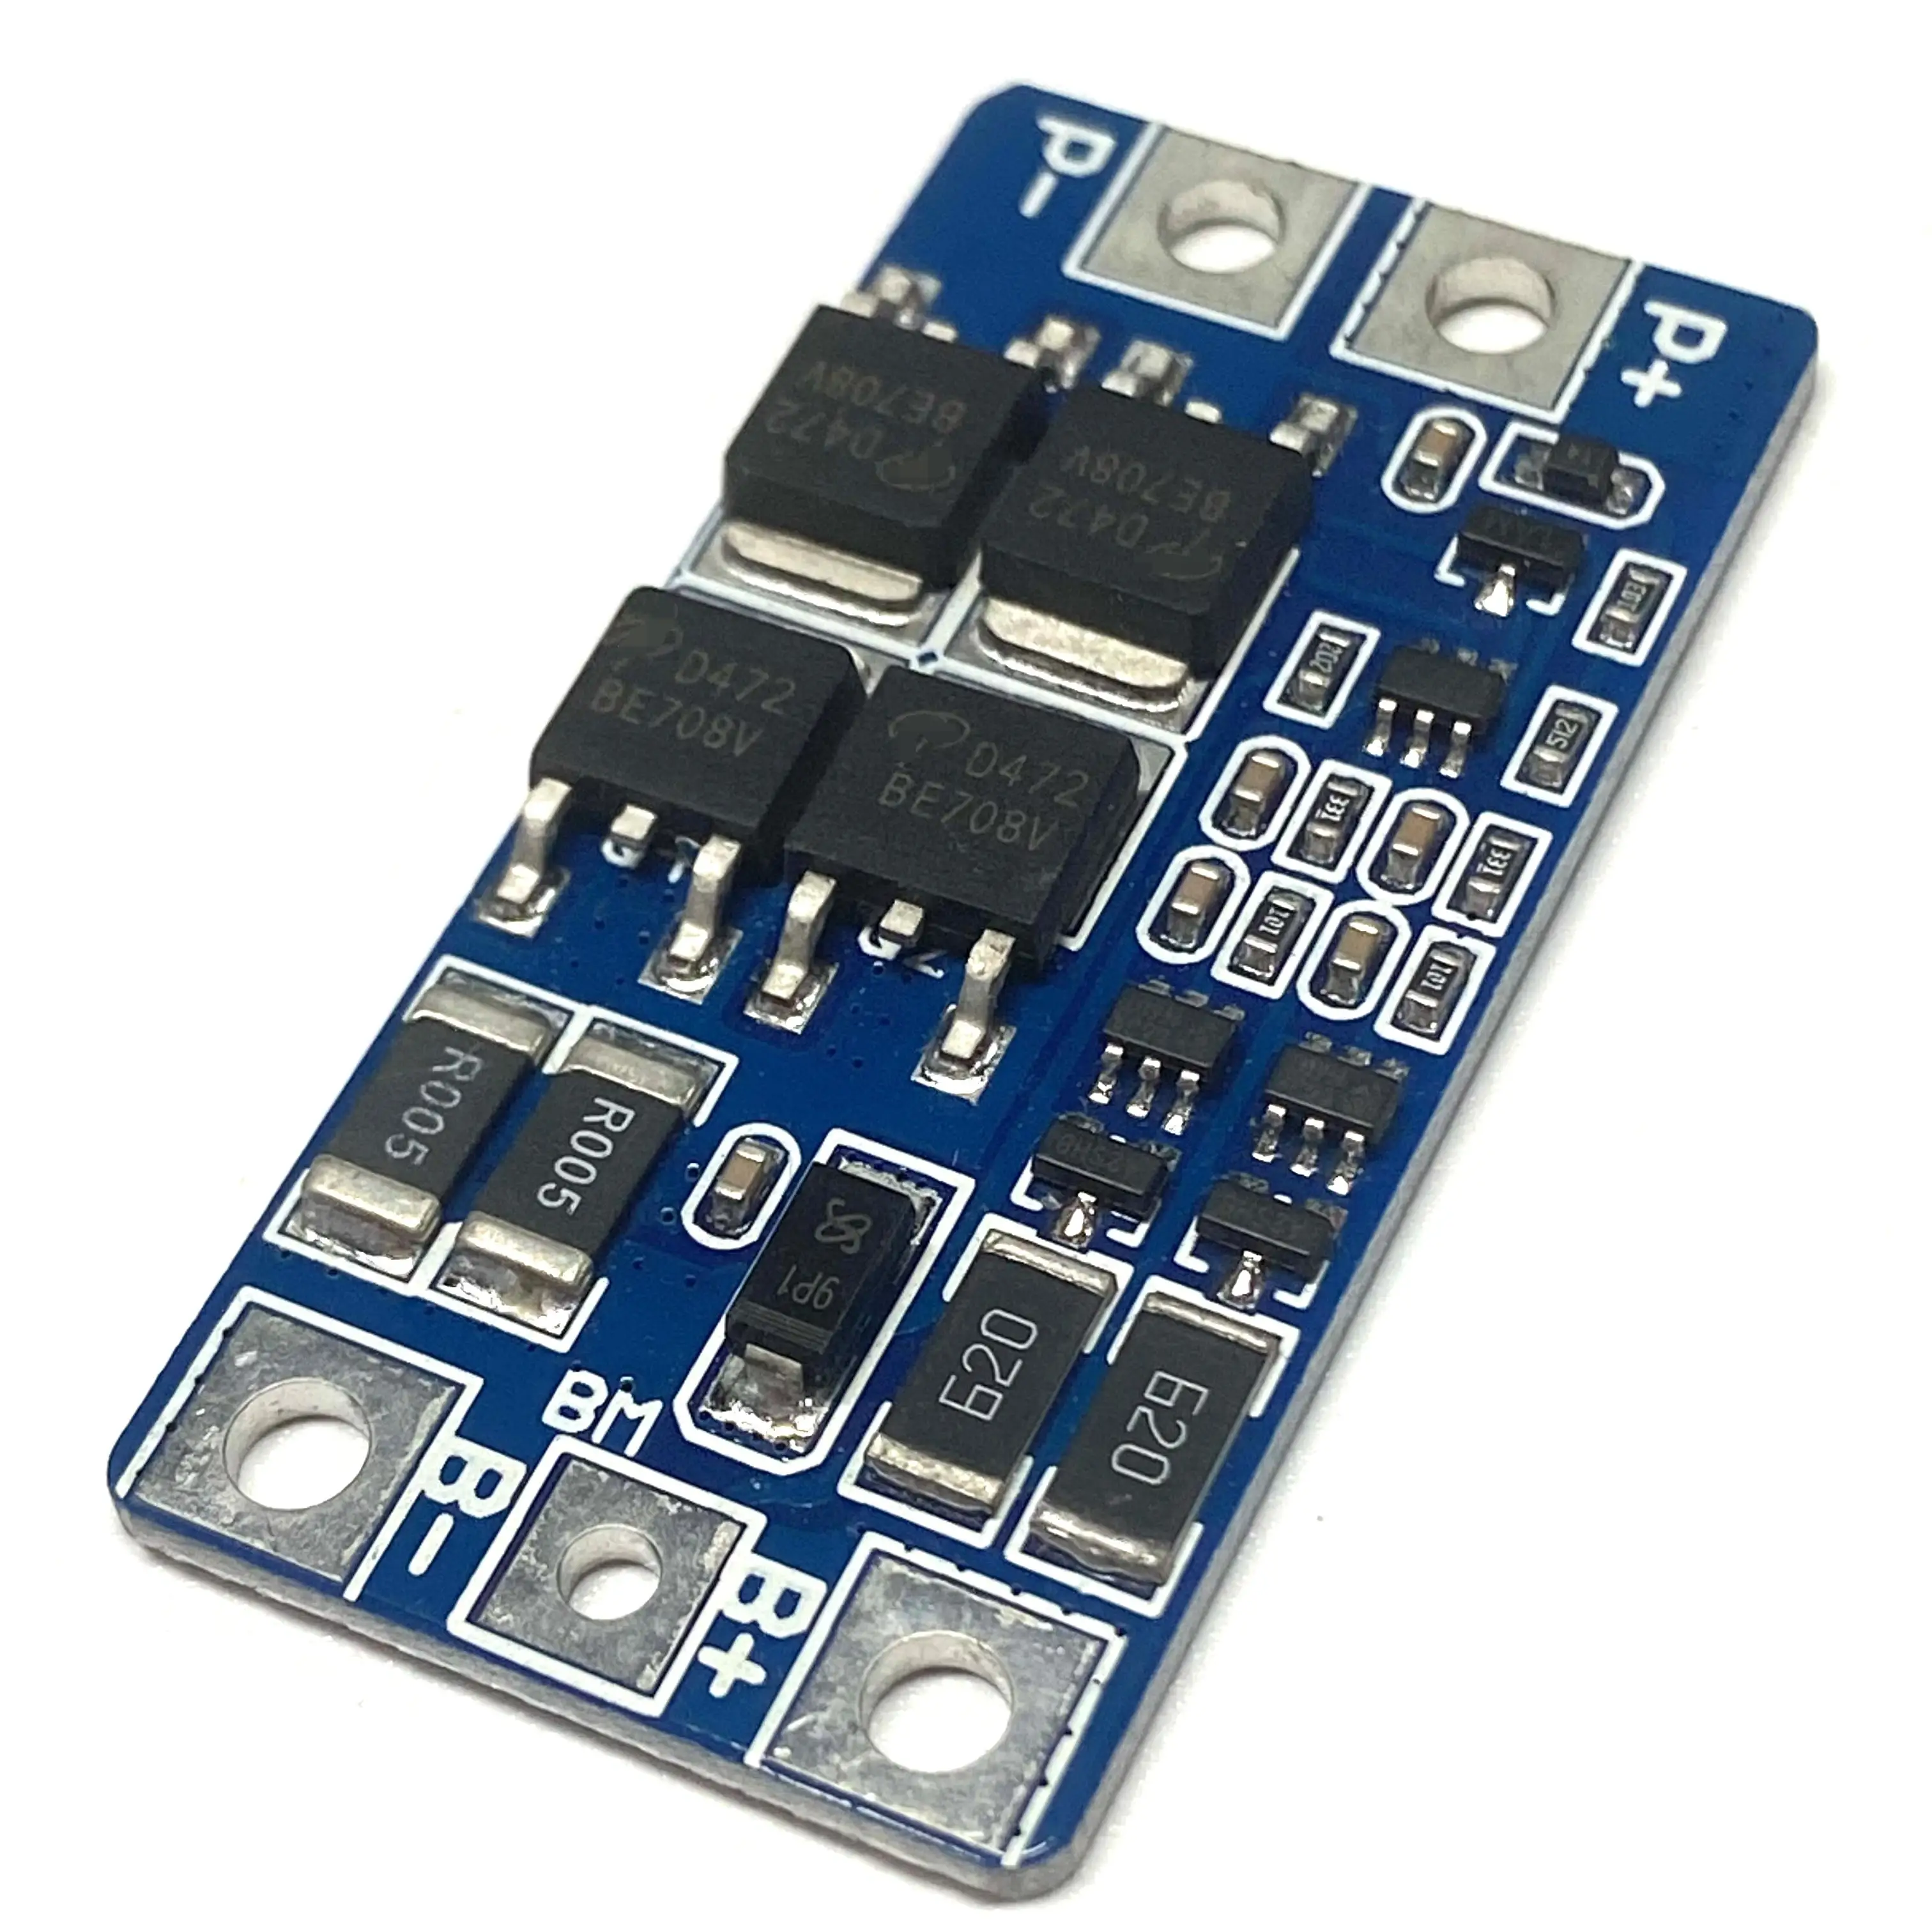 18650 Lithium Battery Protection Board 2S 10A 7.4V  8.4V Balanced Function/Overcharged Protection Good